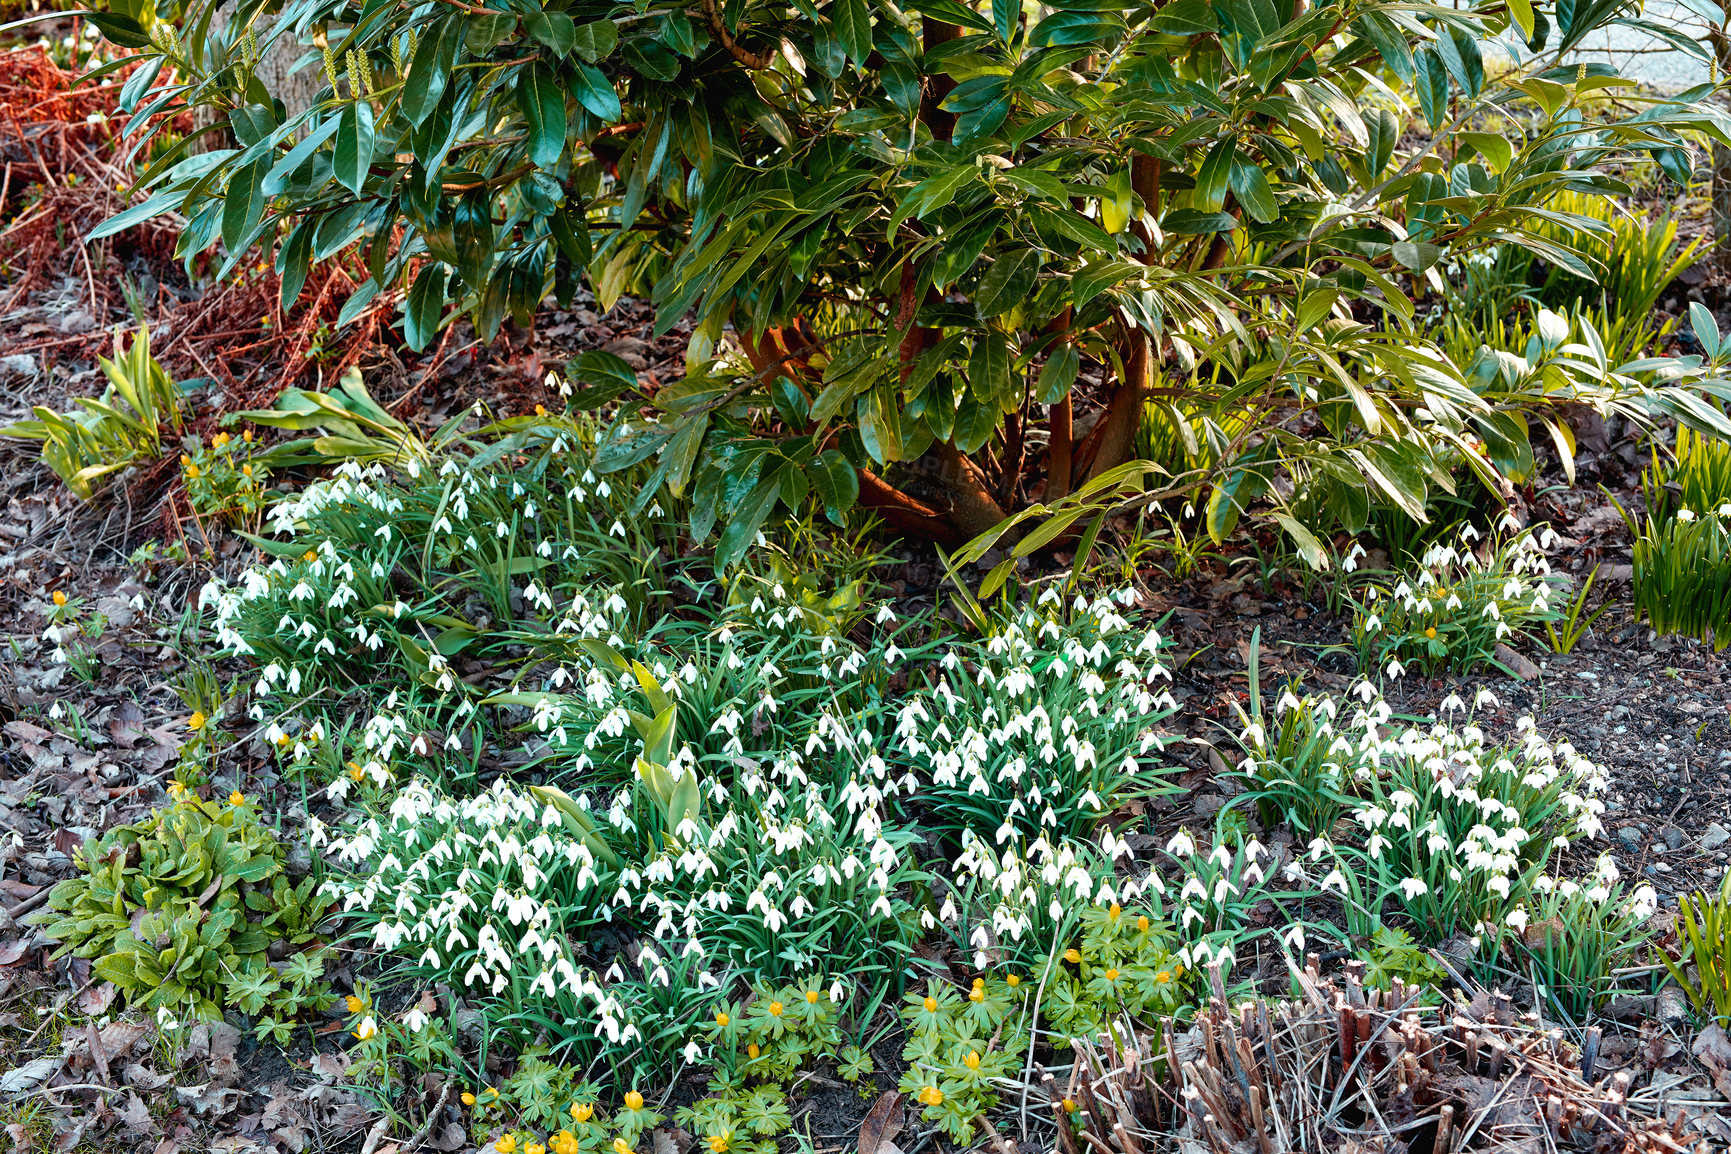 Buy stock photo A bush of snowdrop flowers growing in nature. Landscape of wild common flowering plants or Galanthus Nivalis in between lush leaves and green vegetations in an eco friendly, biodiverse environment